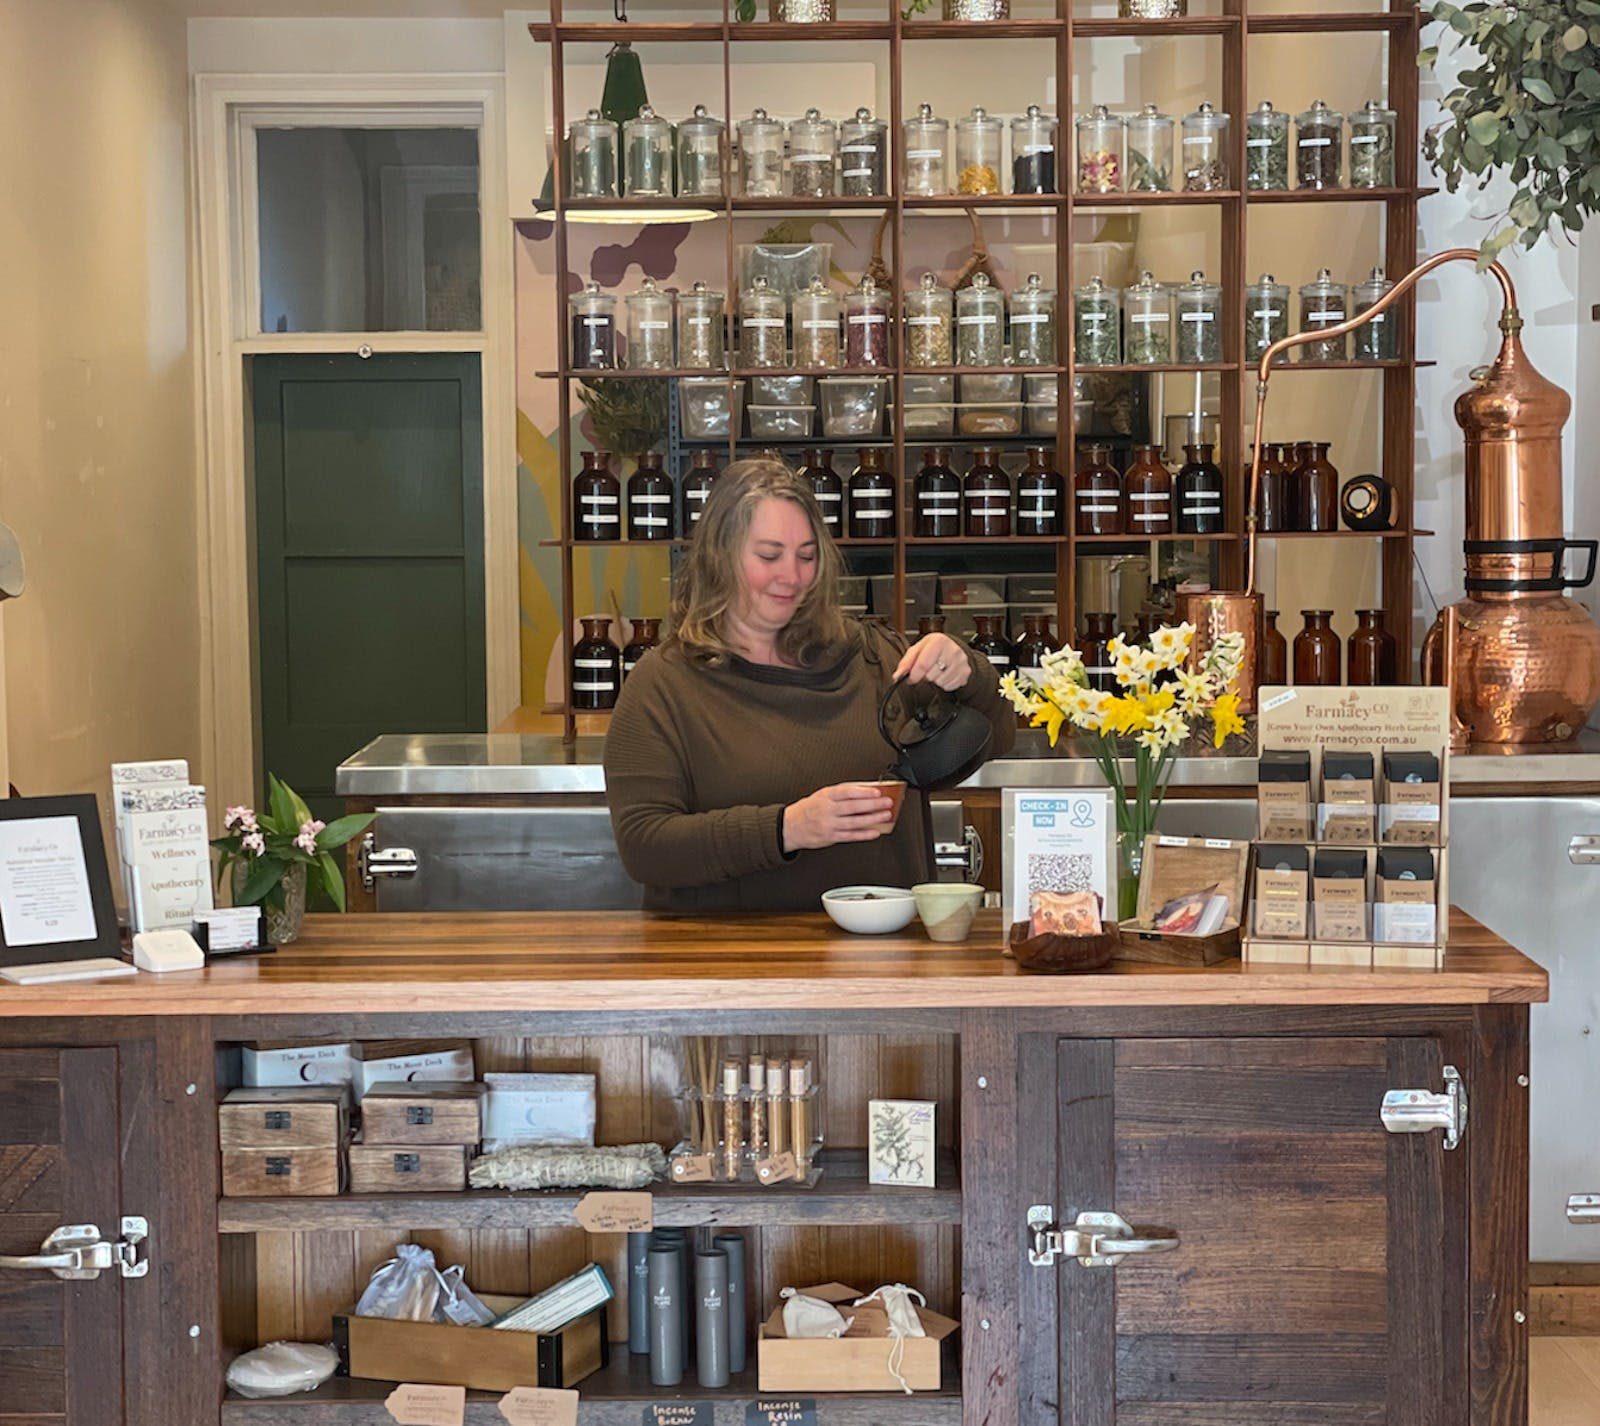 Lady standing behind a counter pouring tea